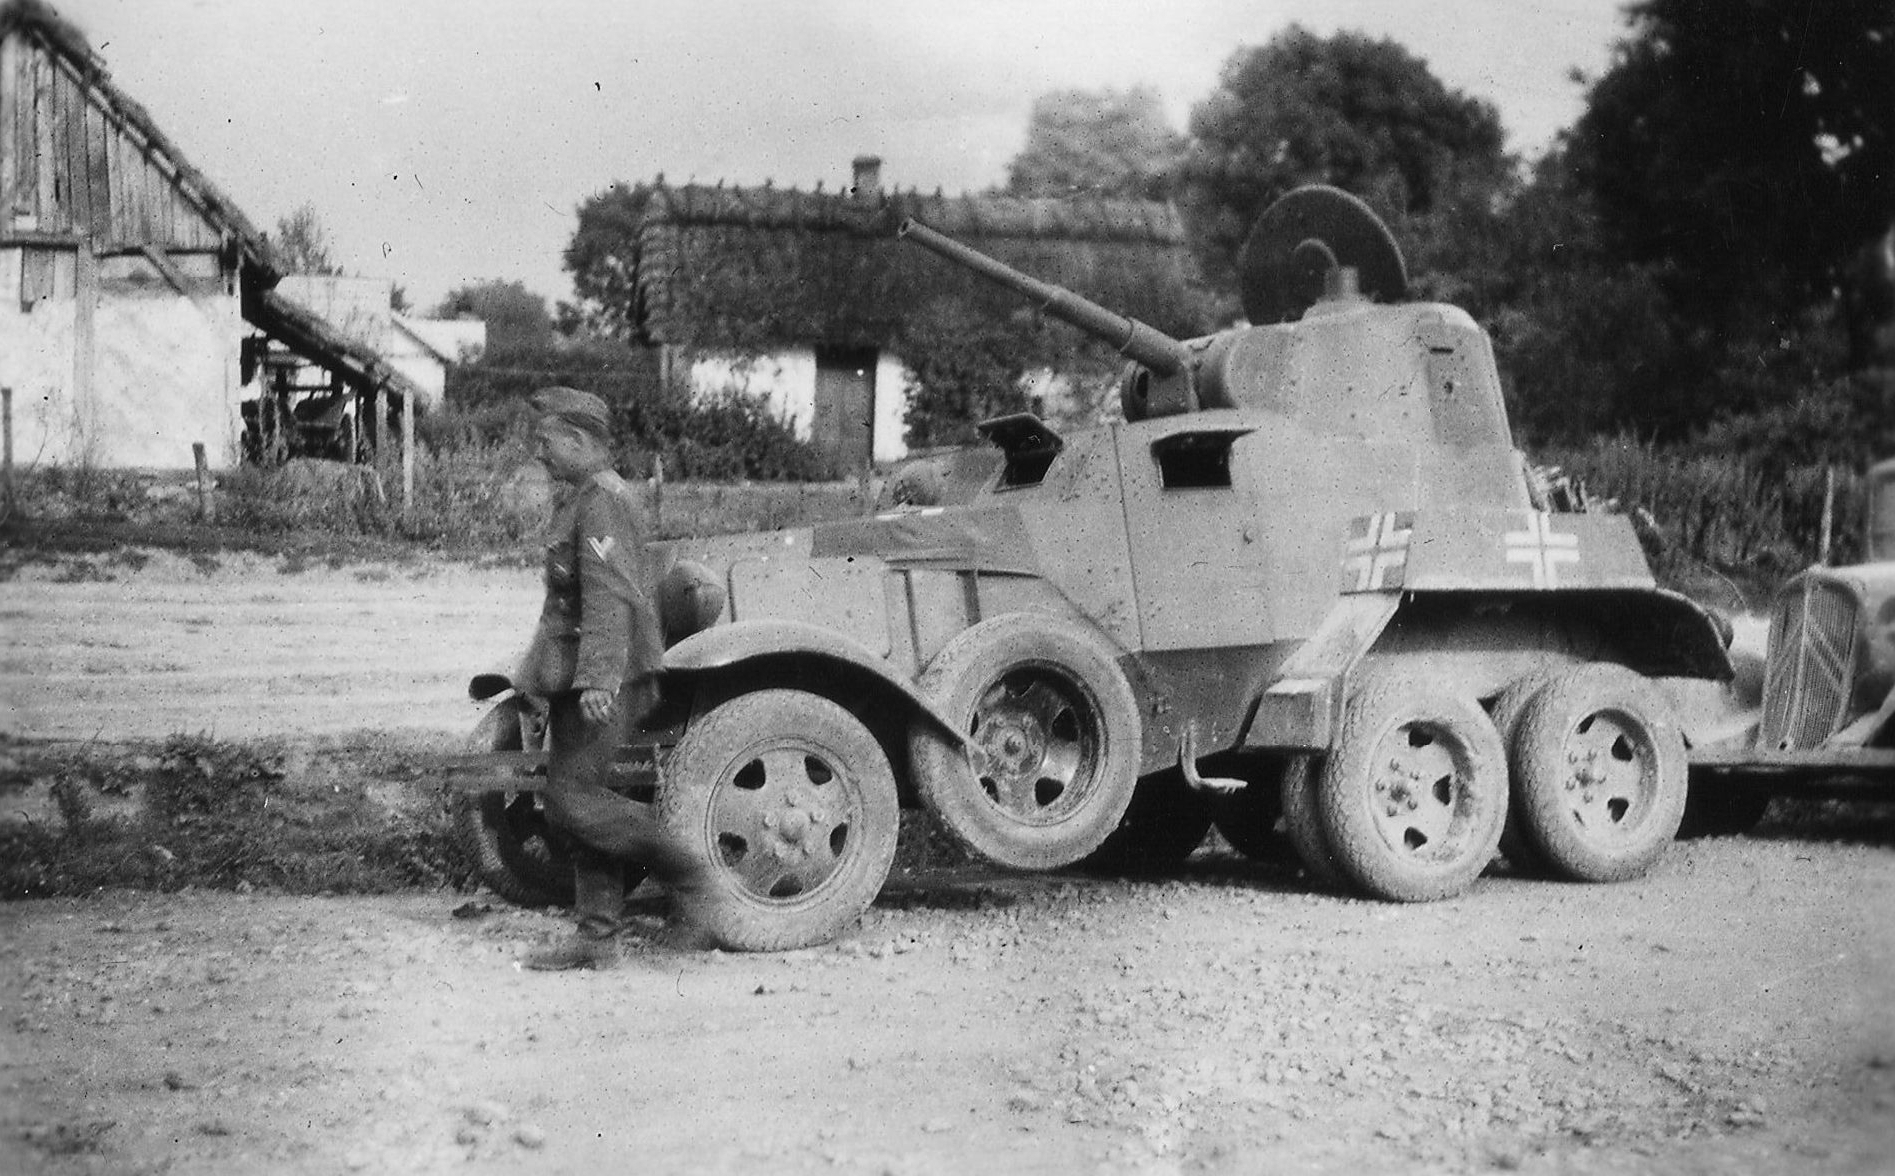 Captured Soviet BA-10 armored car with German markings, date unknown